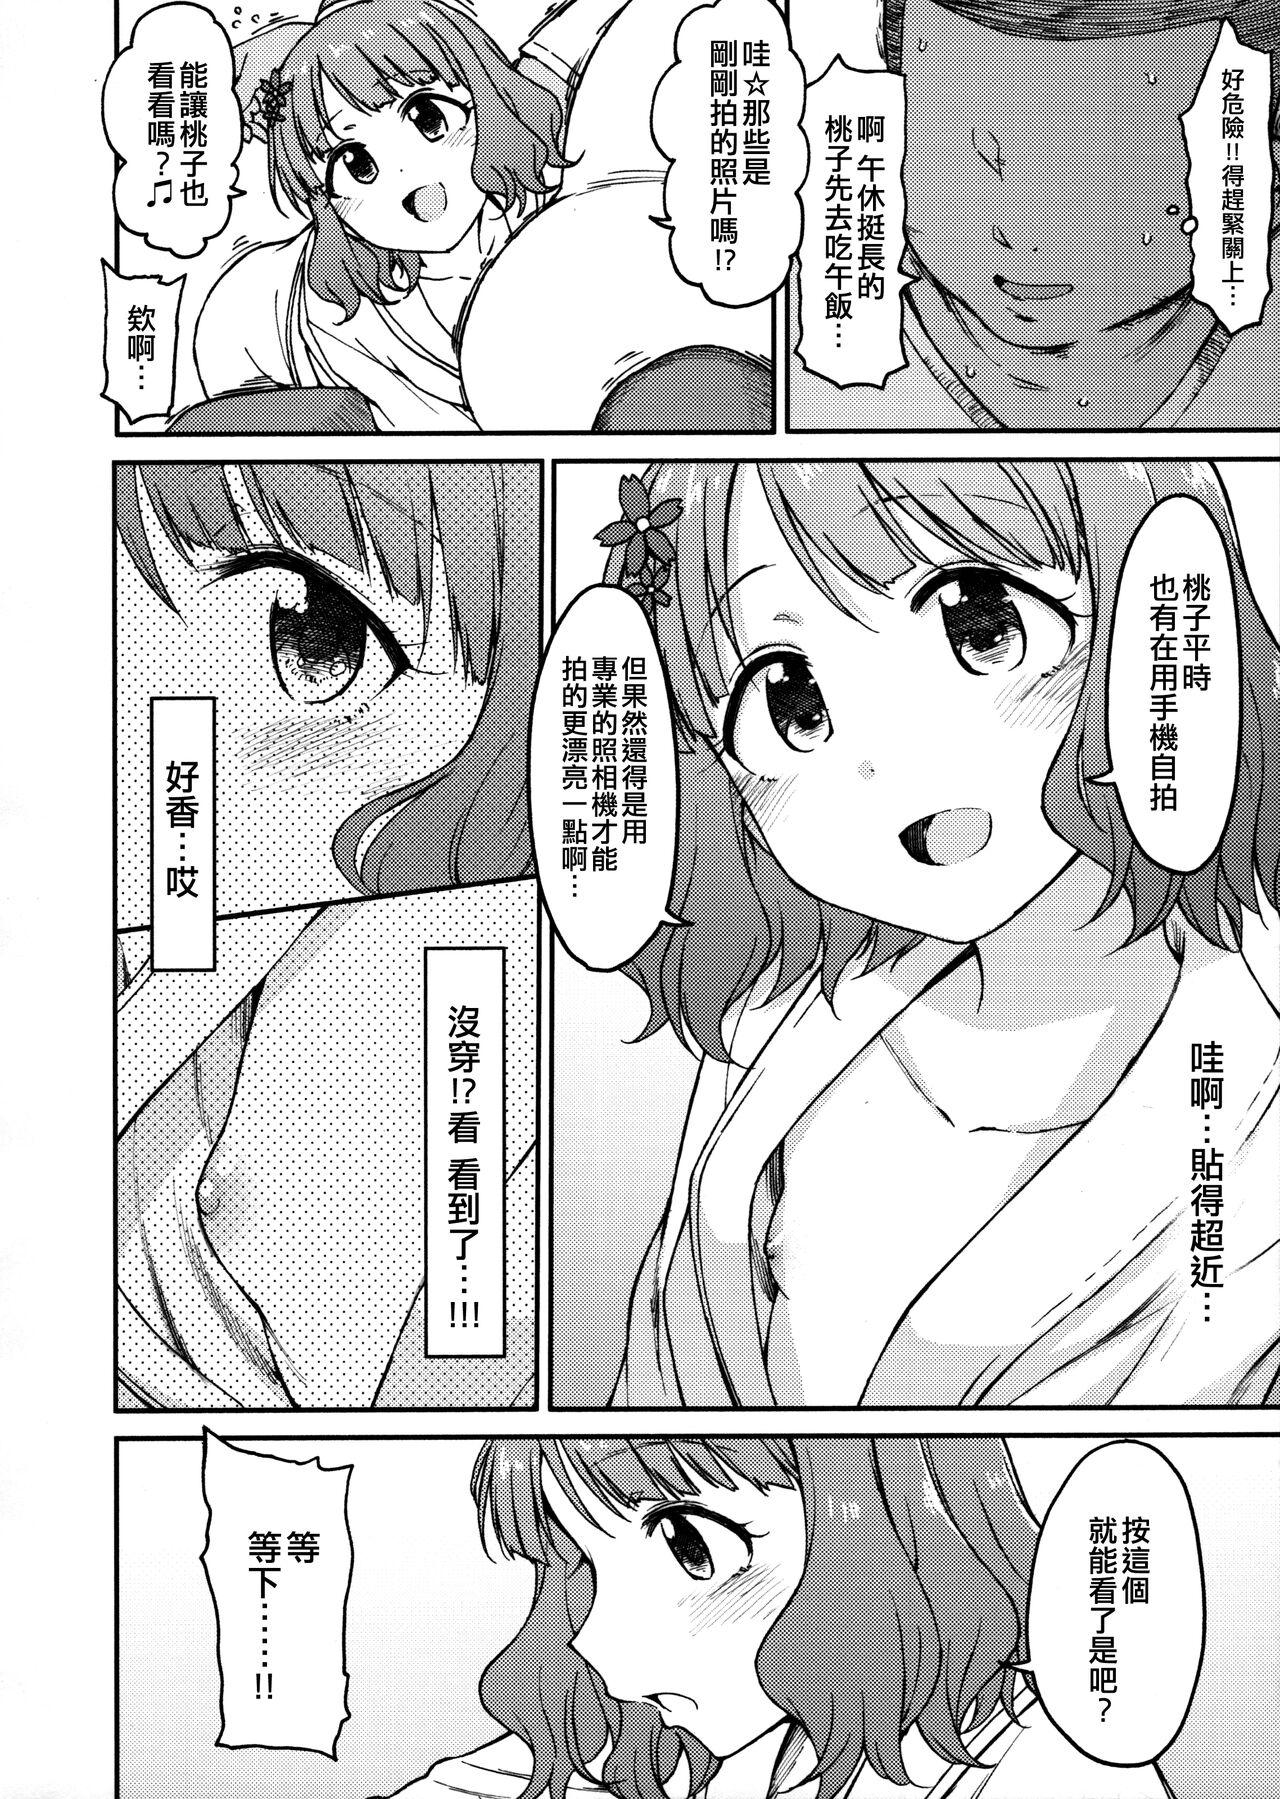 Female Candy Wrapper - The idolmaster Small - Page 11